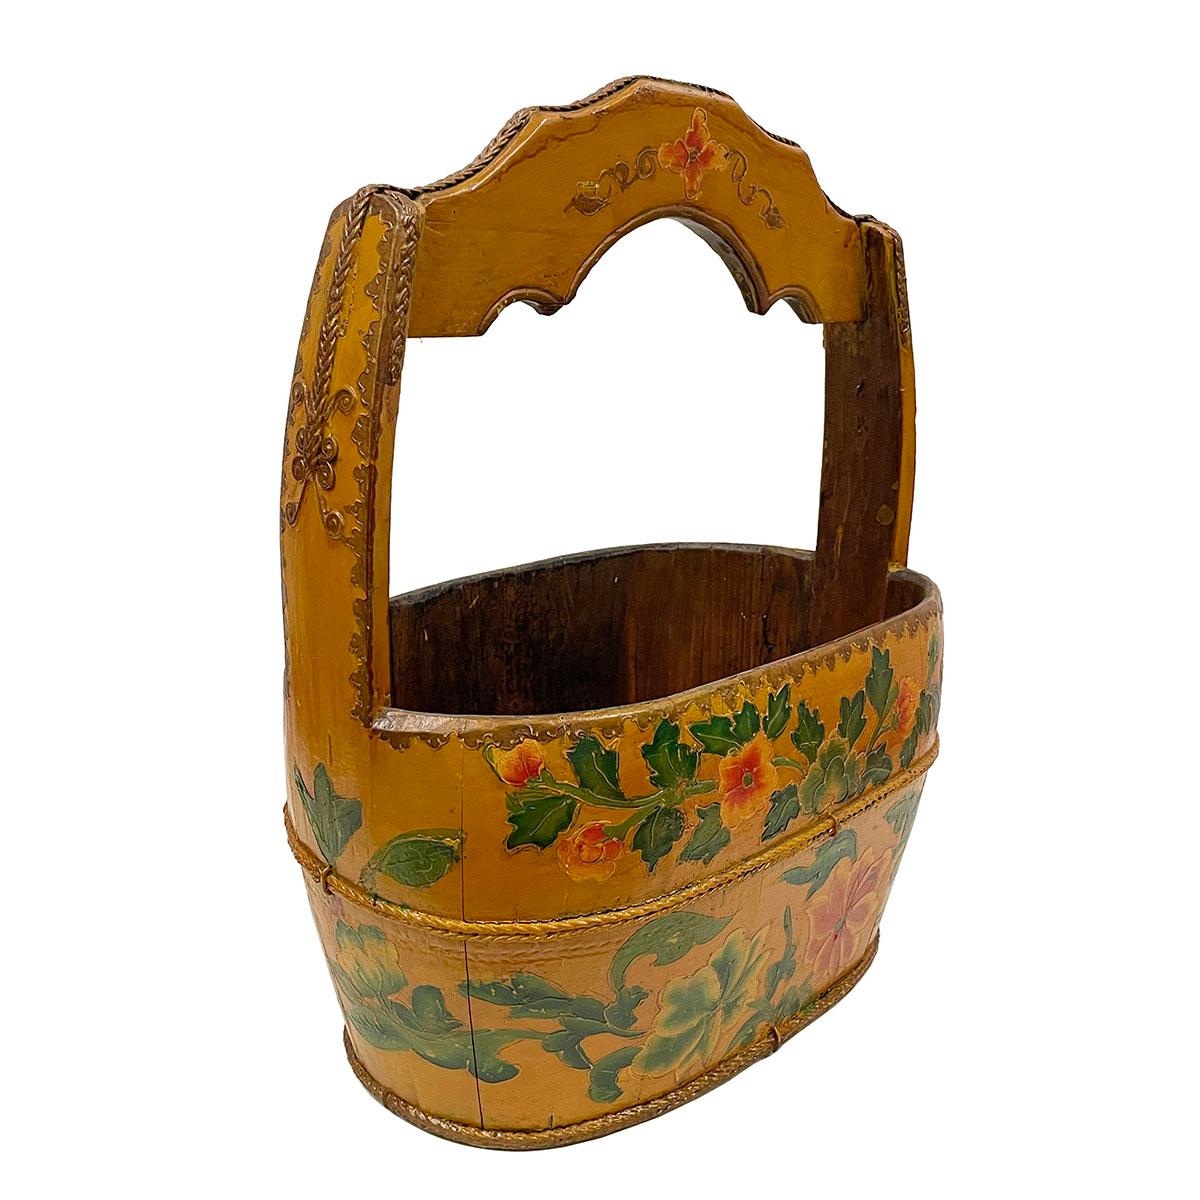 This beautiful Antique Water Bucket was originally came from China, and has over 100 years history. It is made from wooden panels that are lined contiguously and secured by metal loops. There are some metal works on the joint and around bucket to